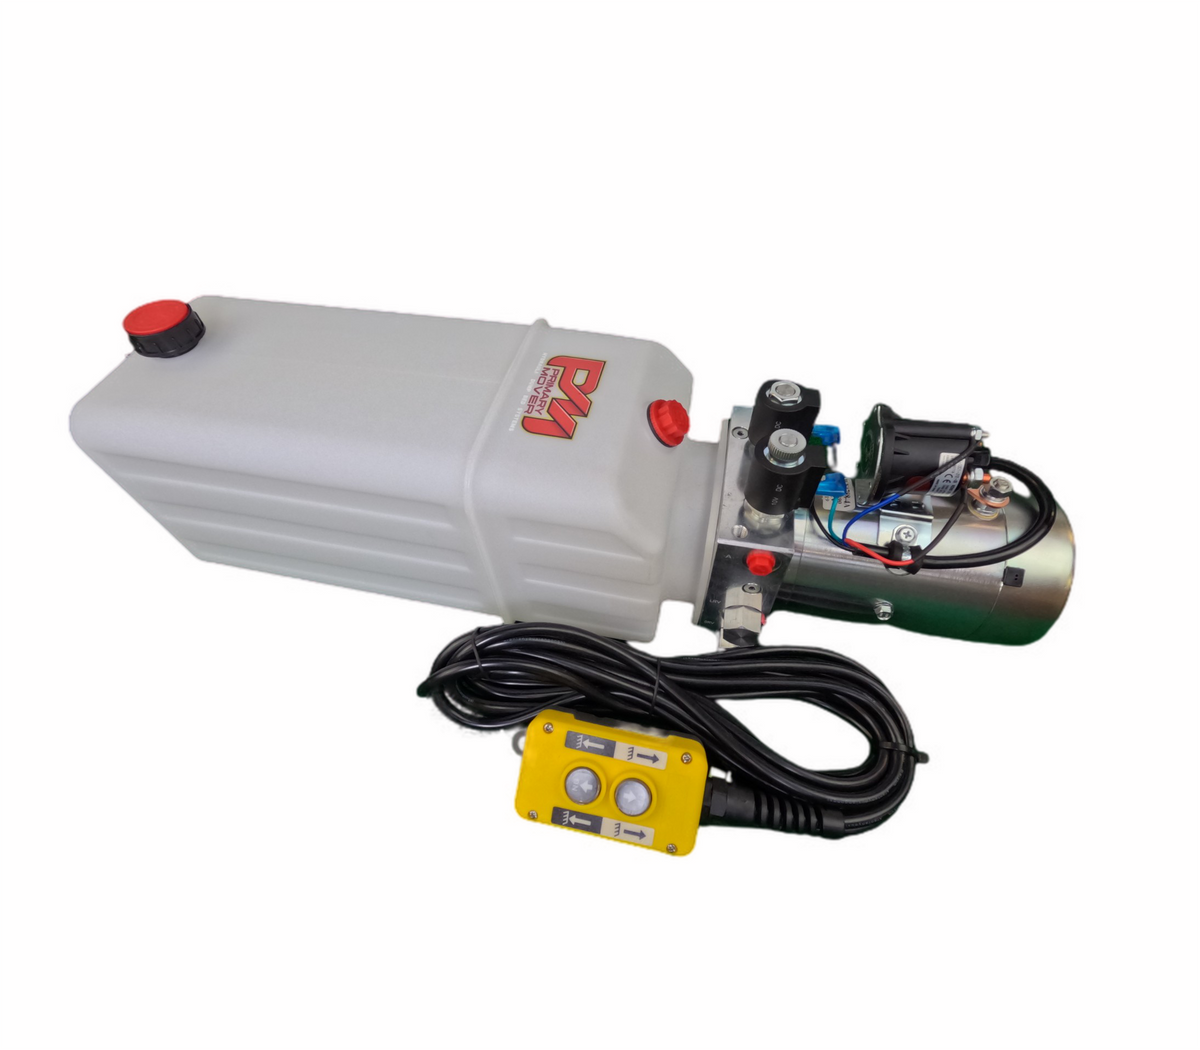 DLH 12V Double-Acting Hydraulic Pump - Poly Reservoir with yellow control panel, white buttons, and black wires. Reliable, robust construction for dump bed trailers and trucks.